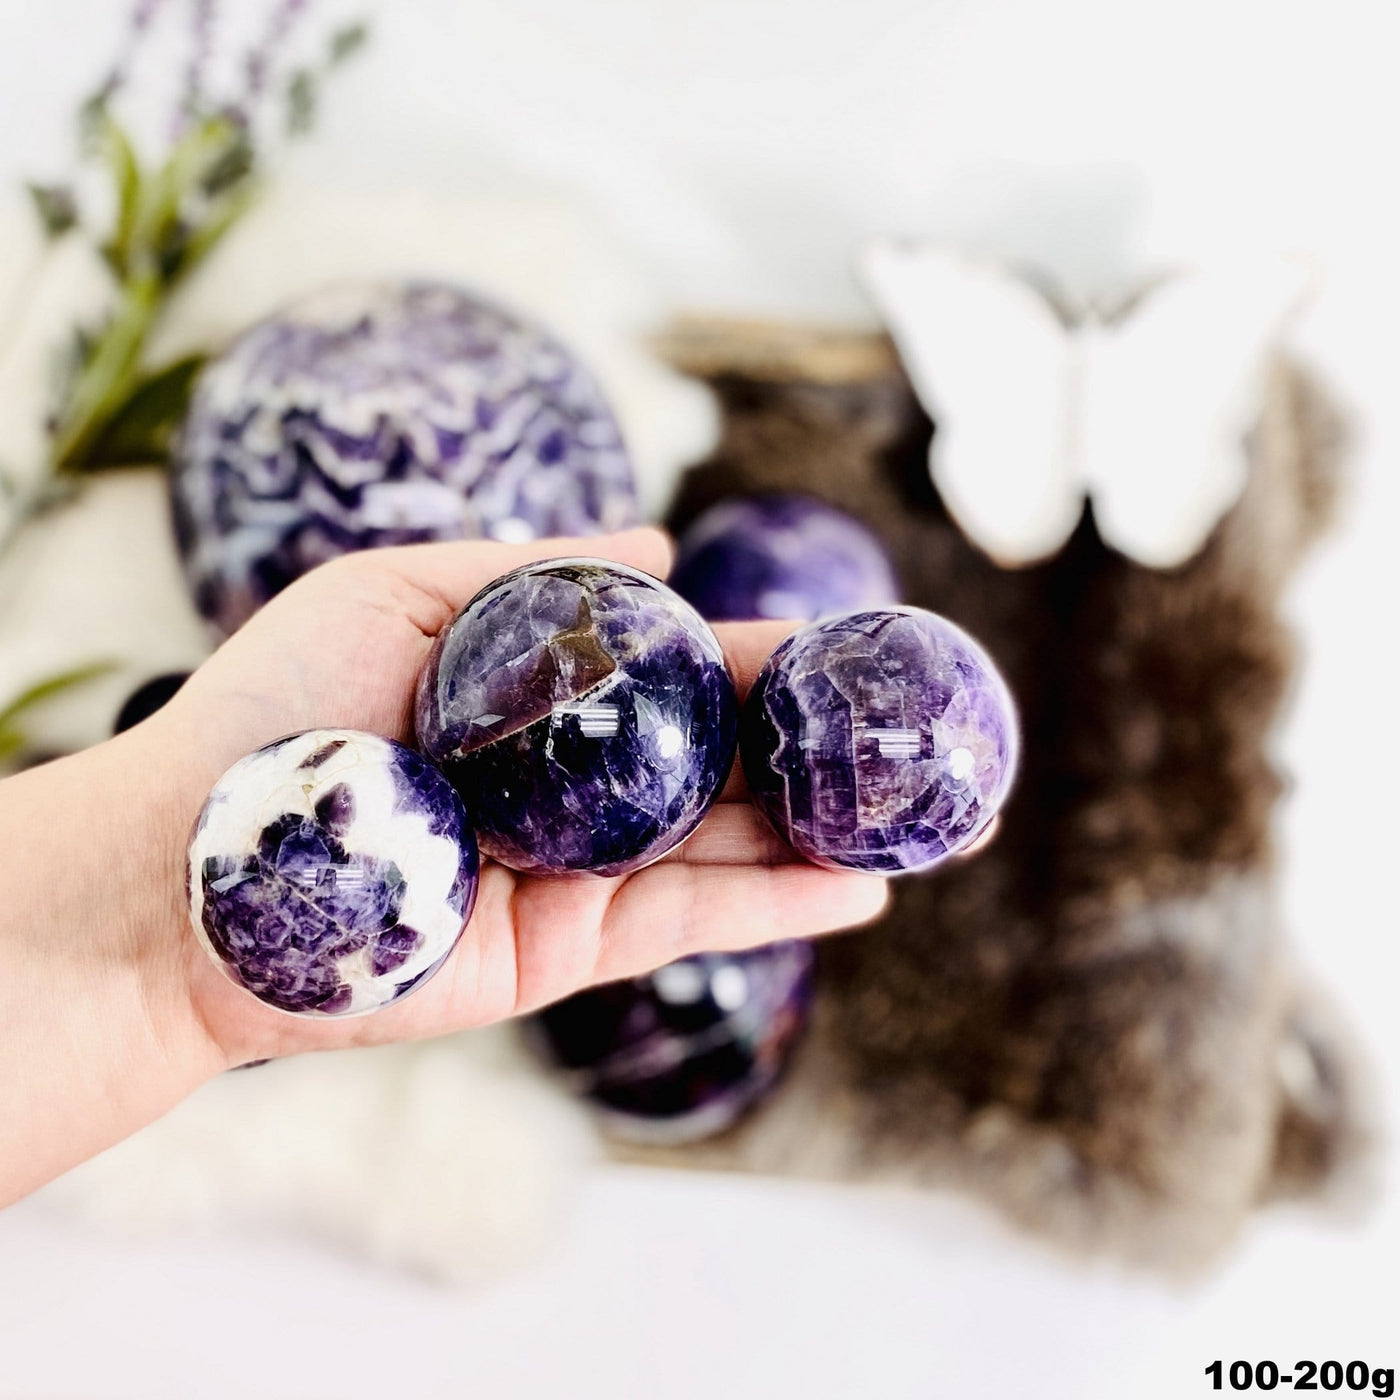 Chevron Amethyst Polished Spheres in a hand, size under 100-200g